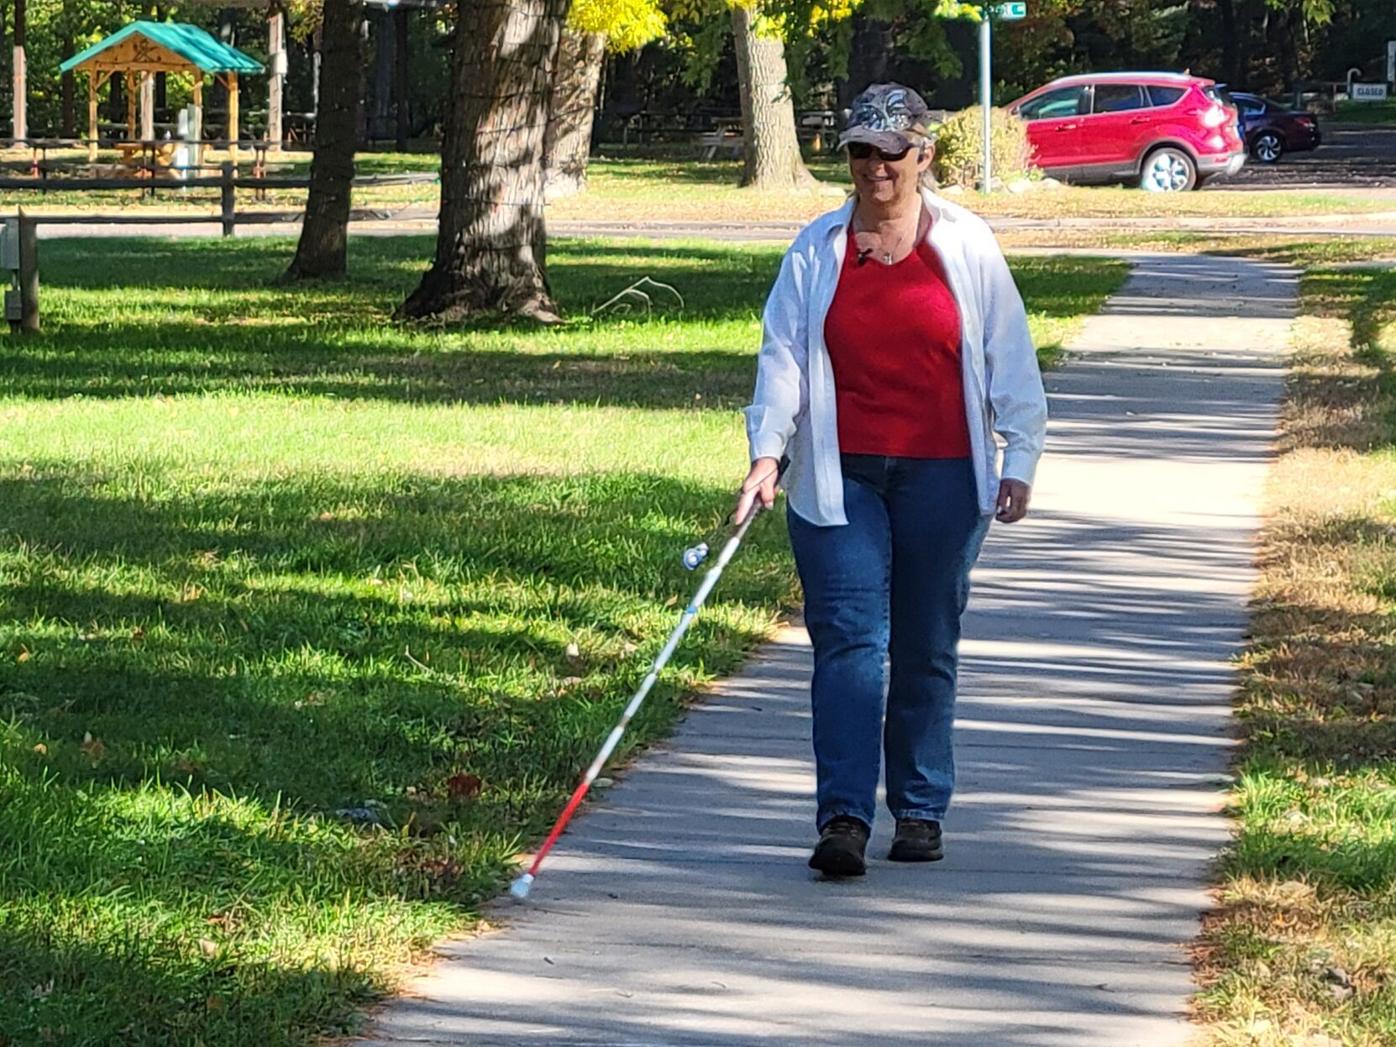 WHITE CANE SAFETY DAY - October 15, 2024 - National Today